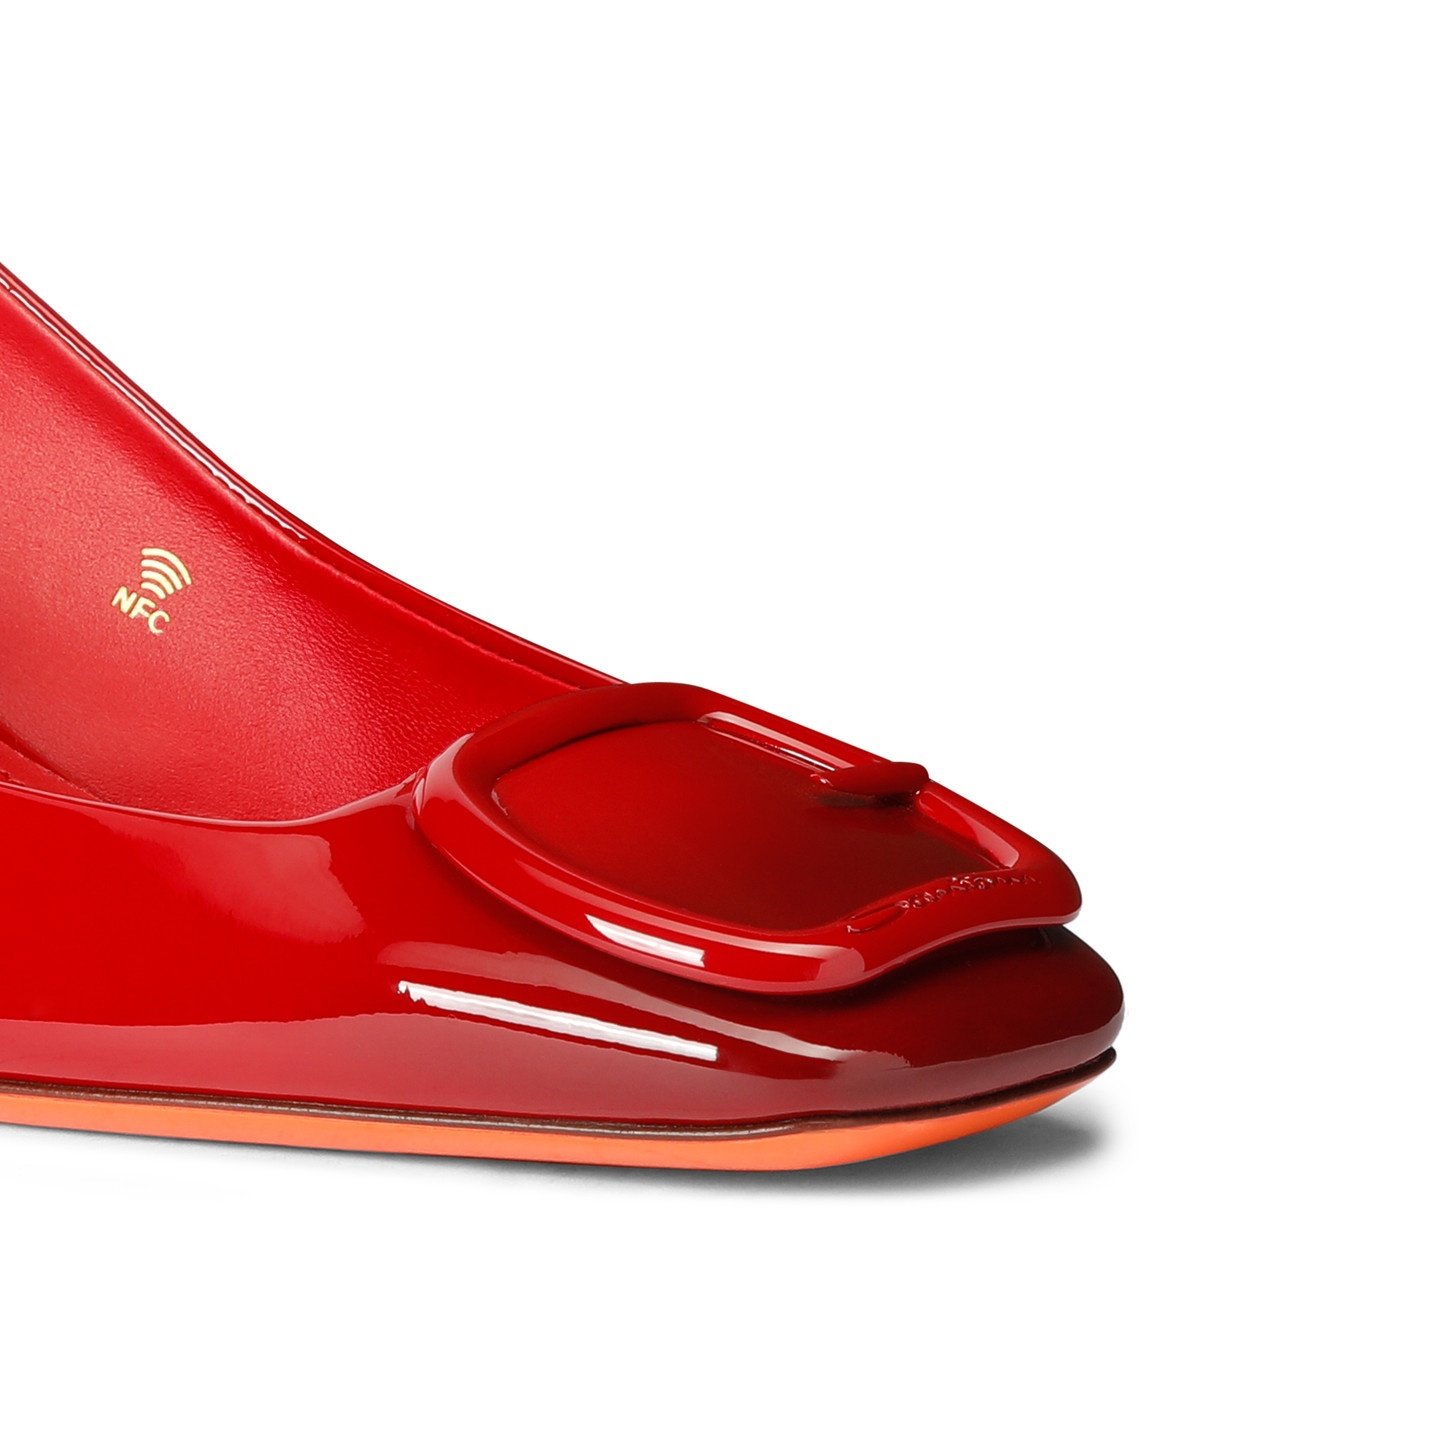 Women's red patent leather mid-heel slingback - 5